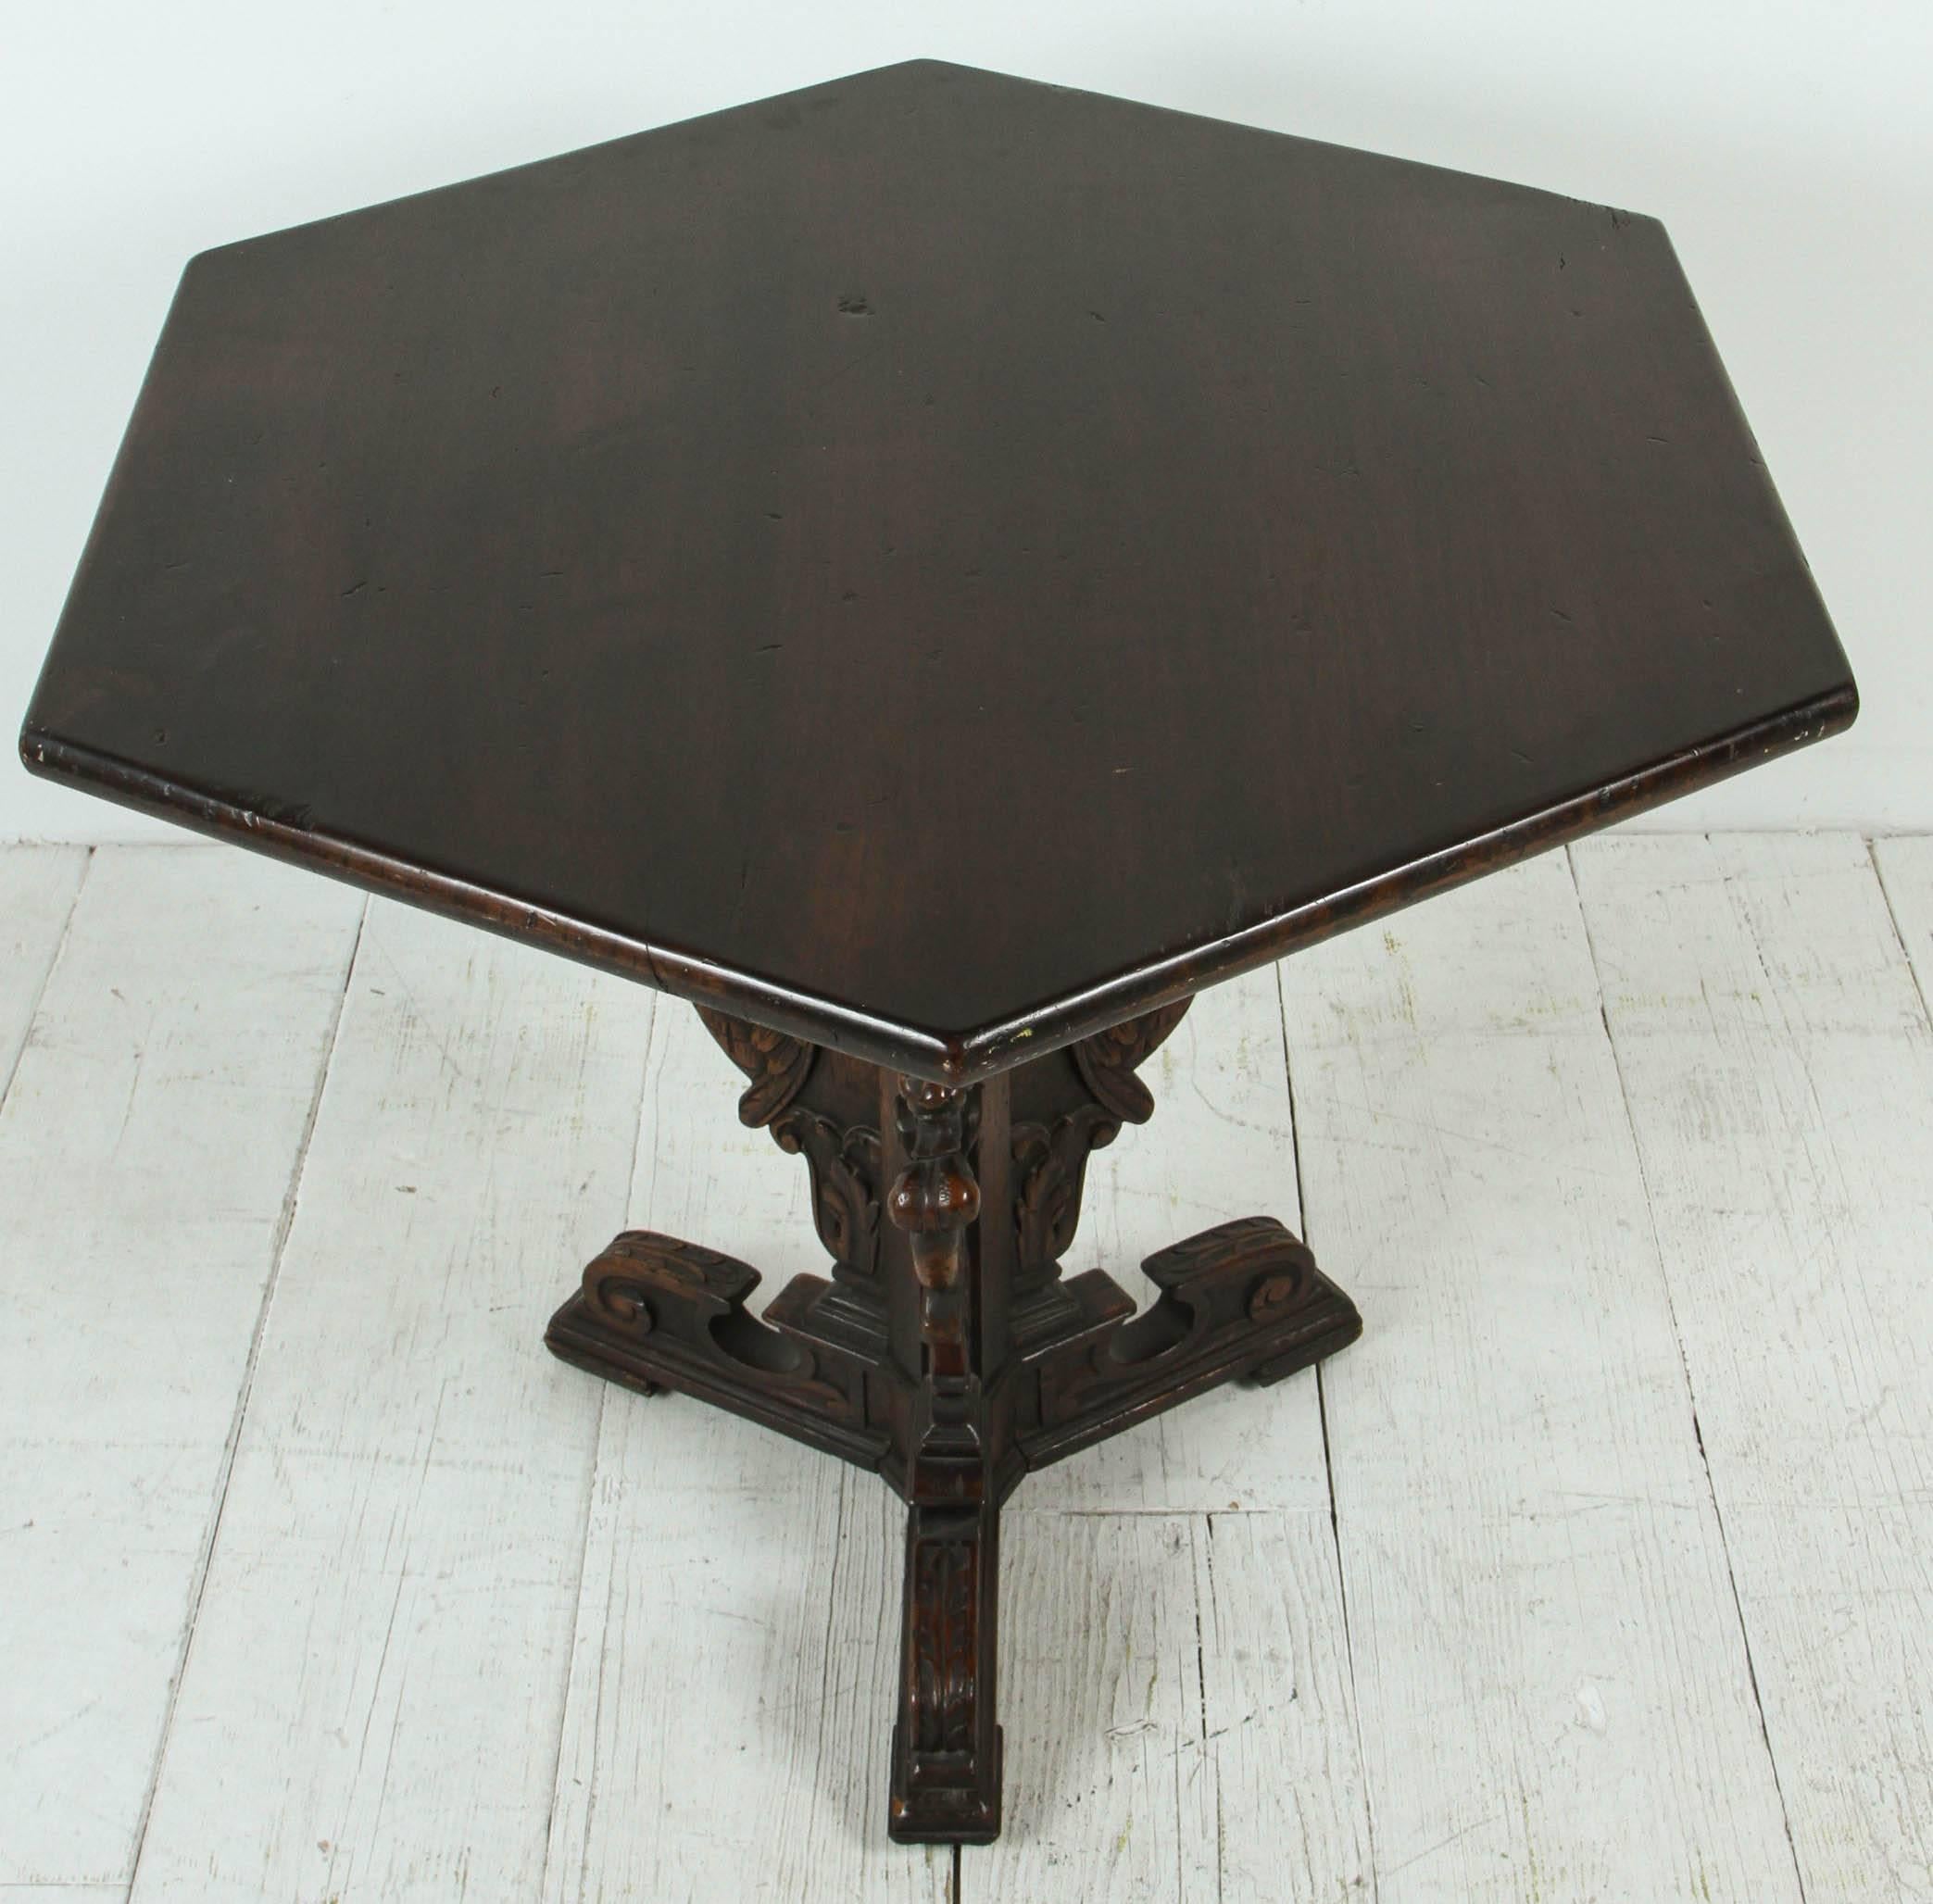 Spanish Pedestal Hexagonal Table with Ornate Details 3